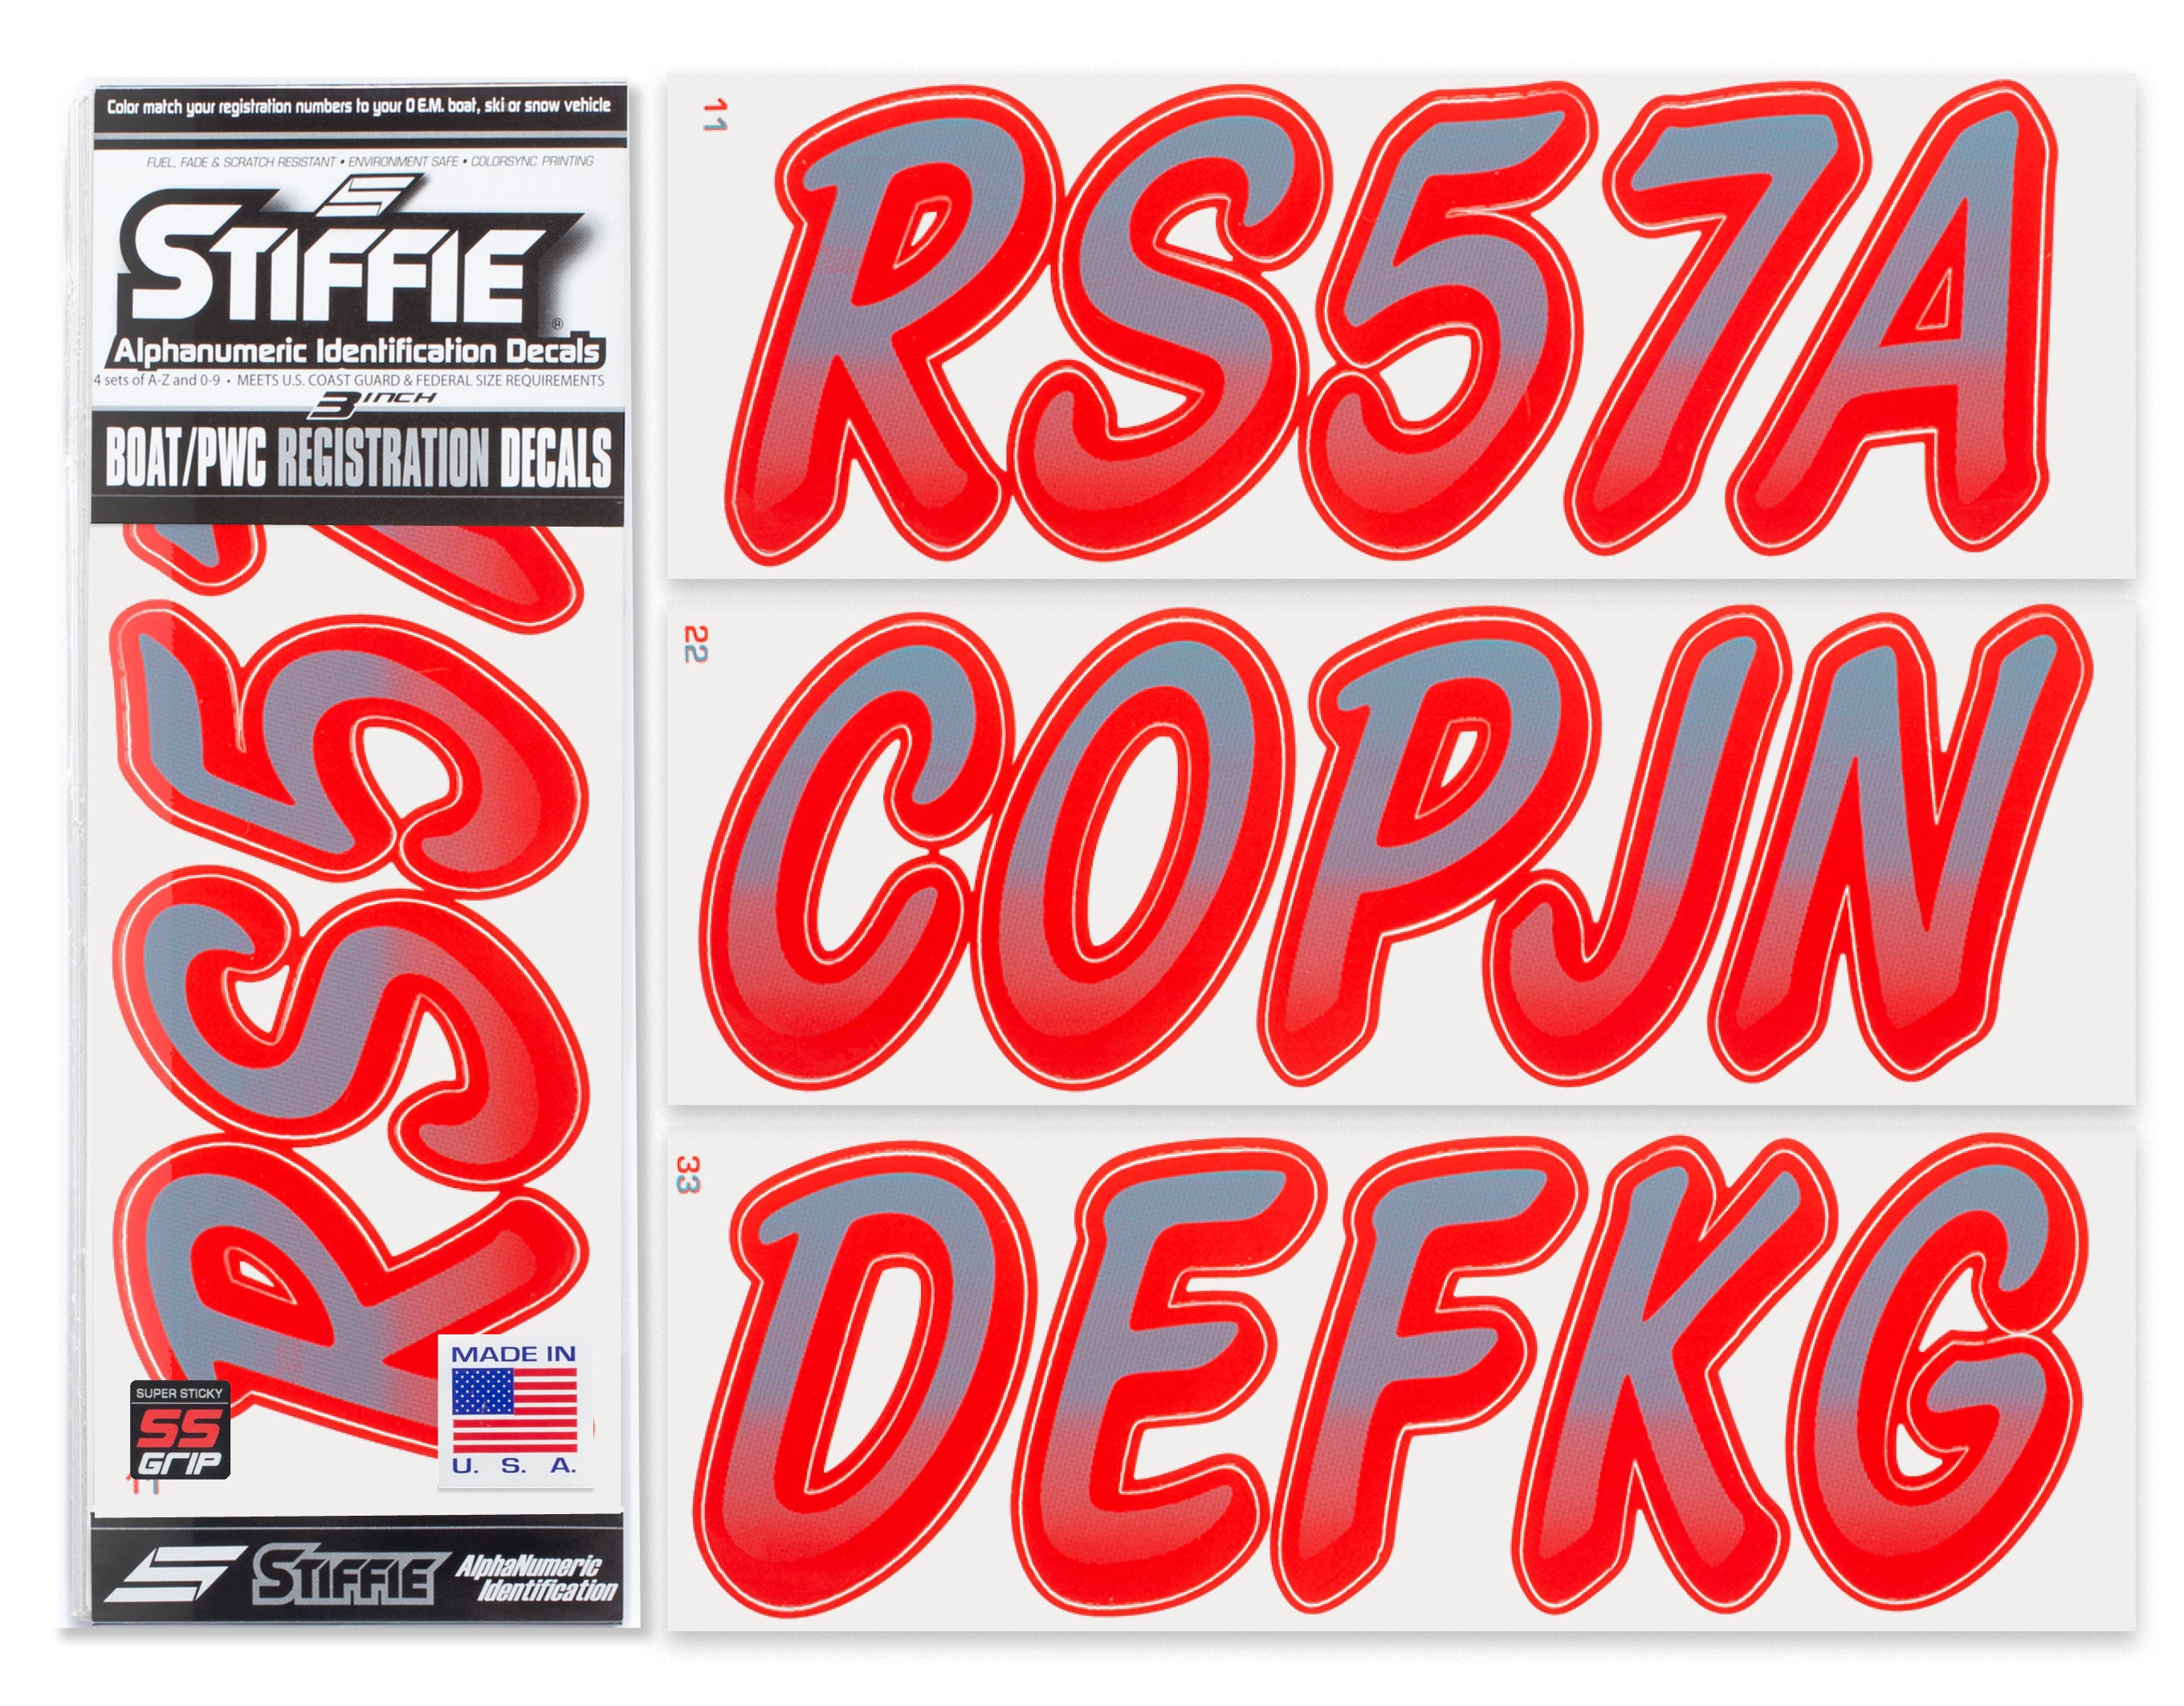 Stiffie Whipline Shark Gray/Lava Red Super Sticky 3" Alpha Numeric Registration Identification Numbers Stickers Decals for Sea-Doo Spark, Inflatable Boats, Ribs, Hypalon/PVC, PWC and Boats